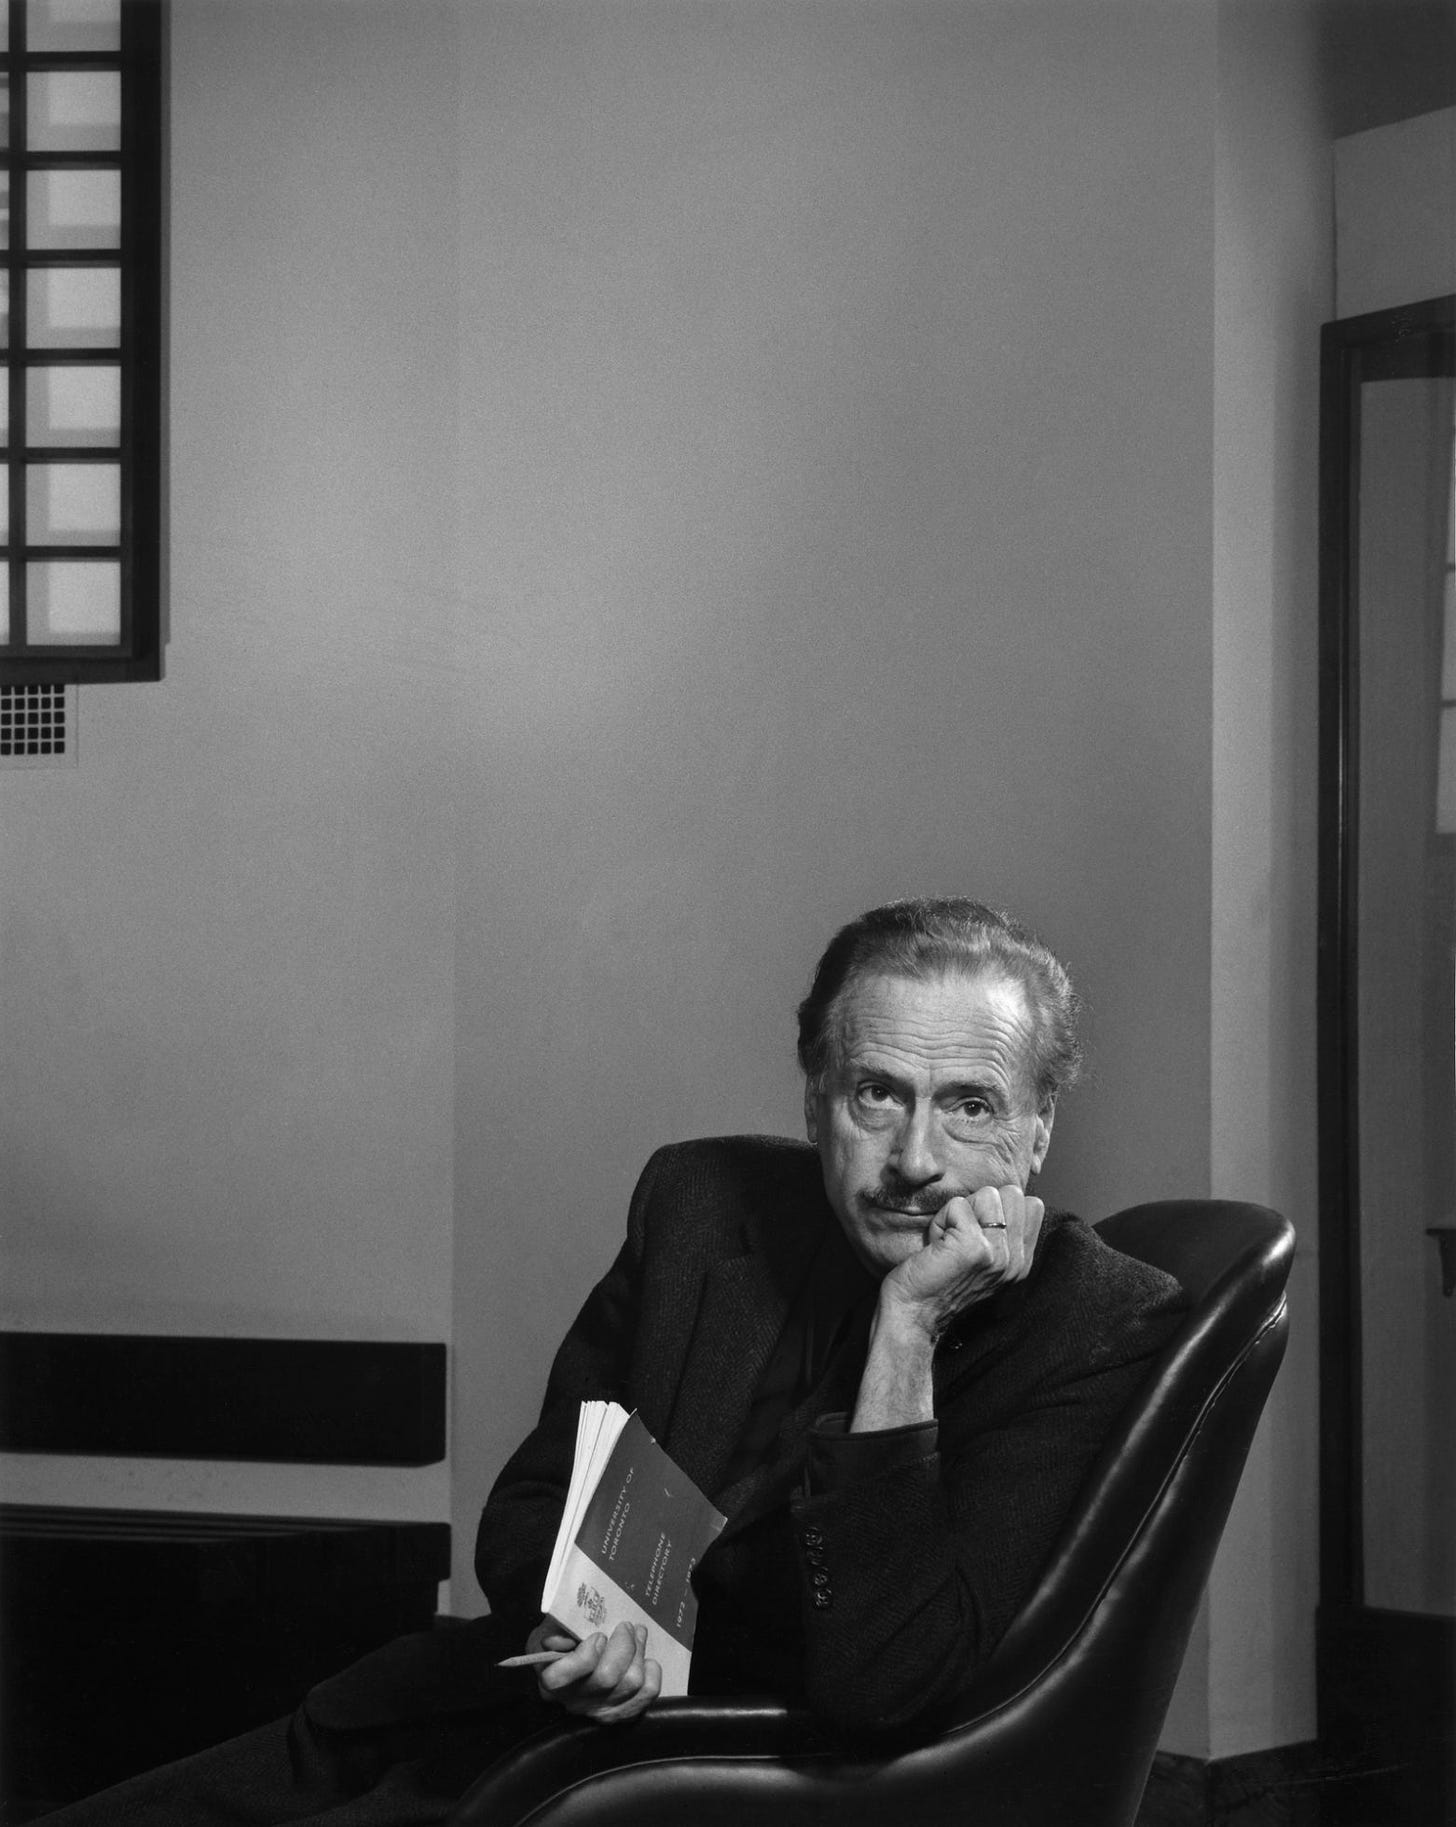 McLuhan sitting in a chair, holding a book.